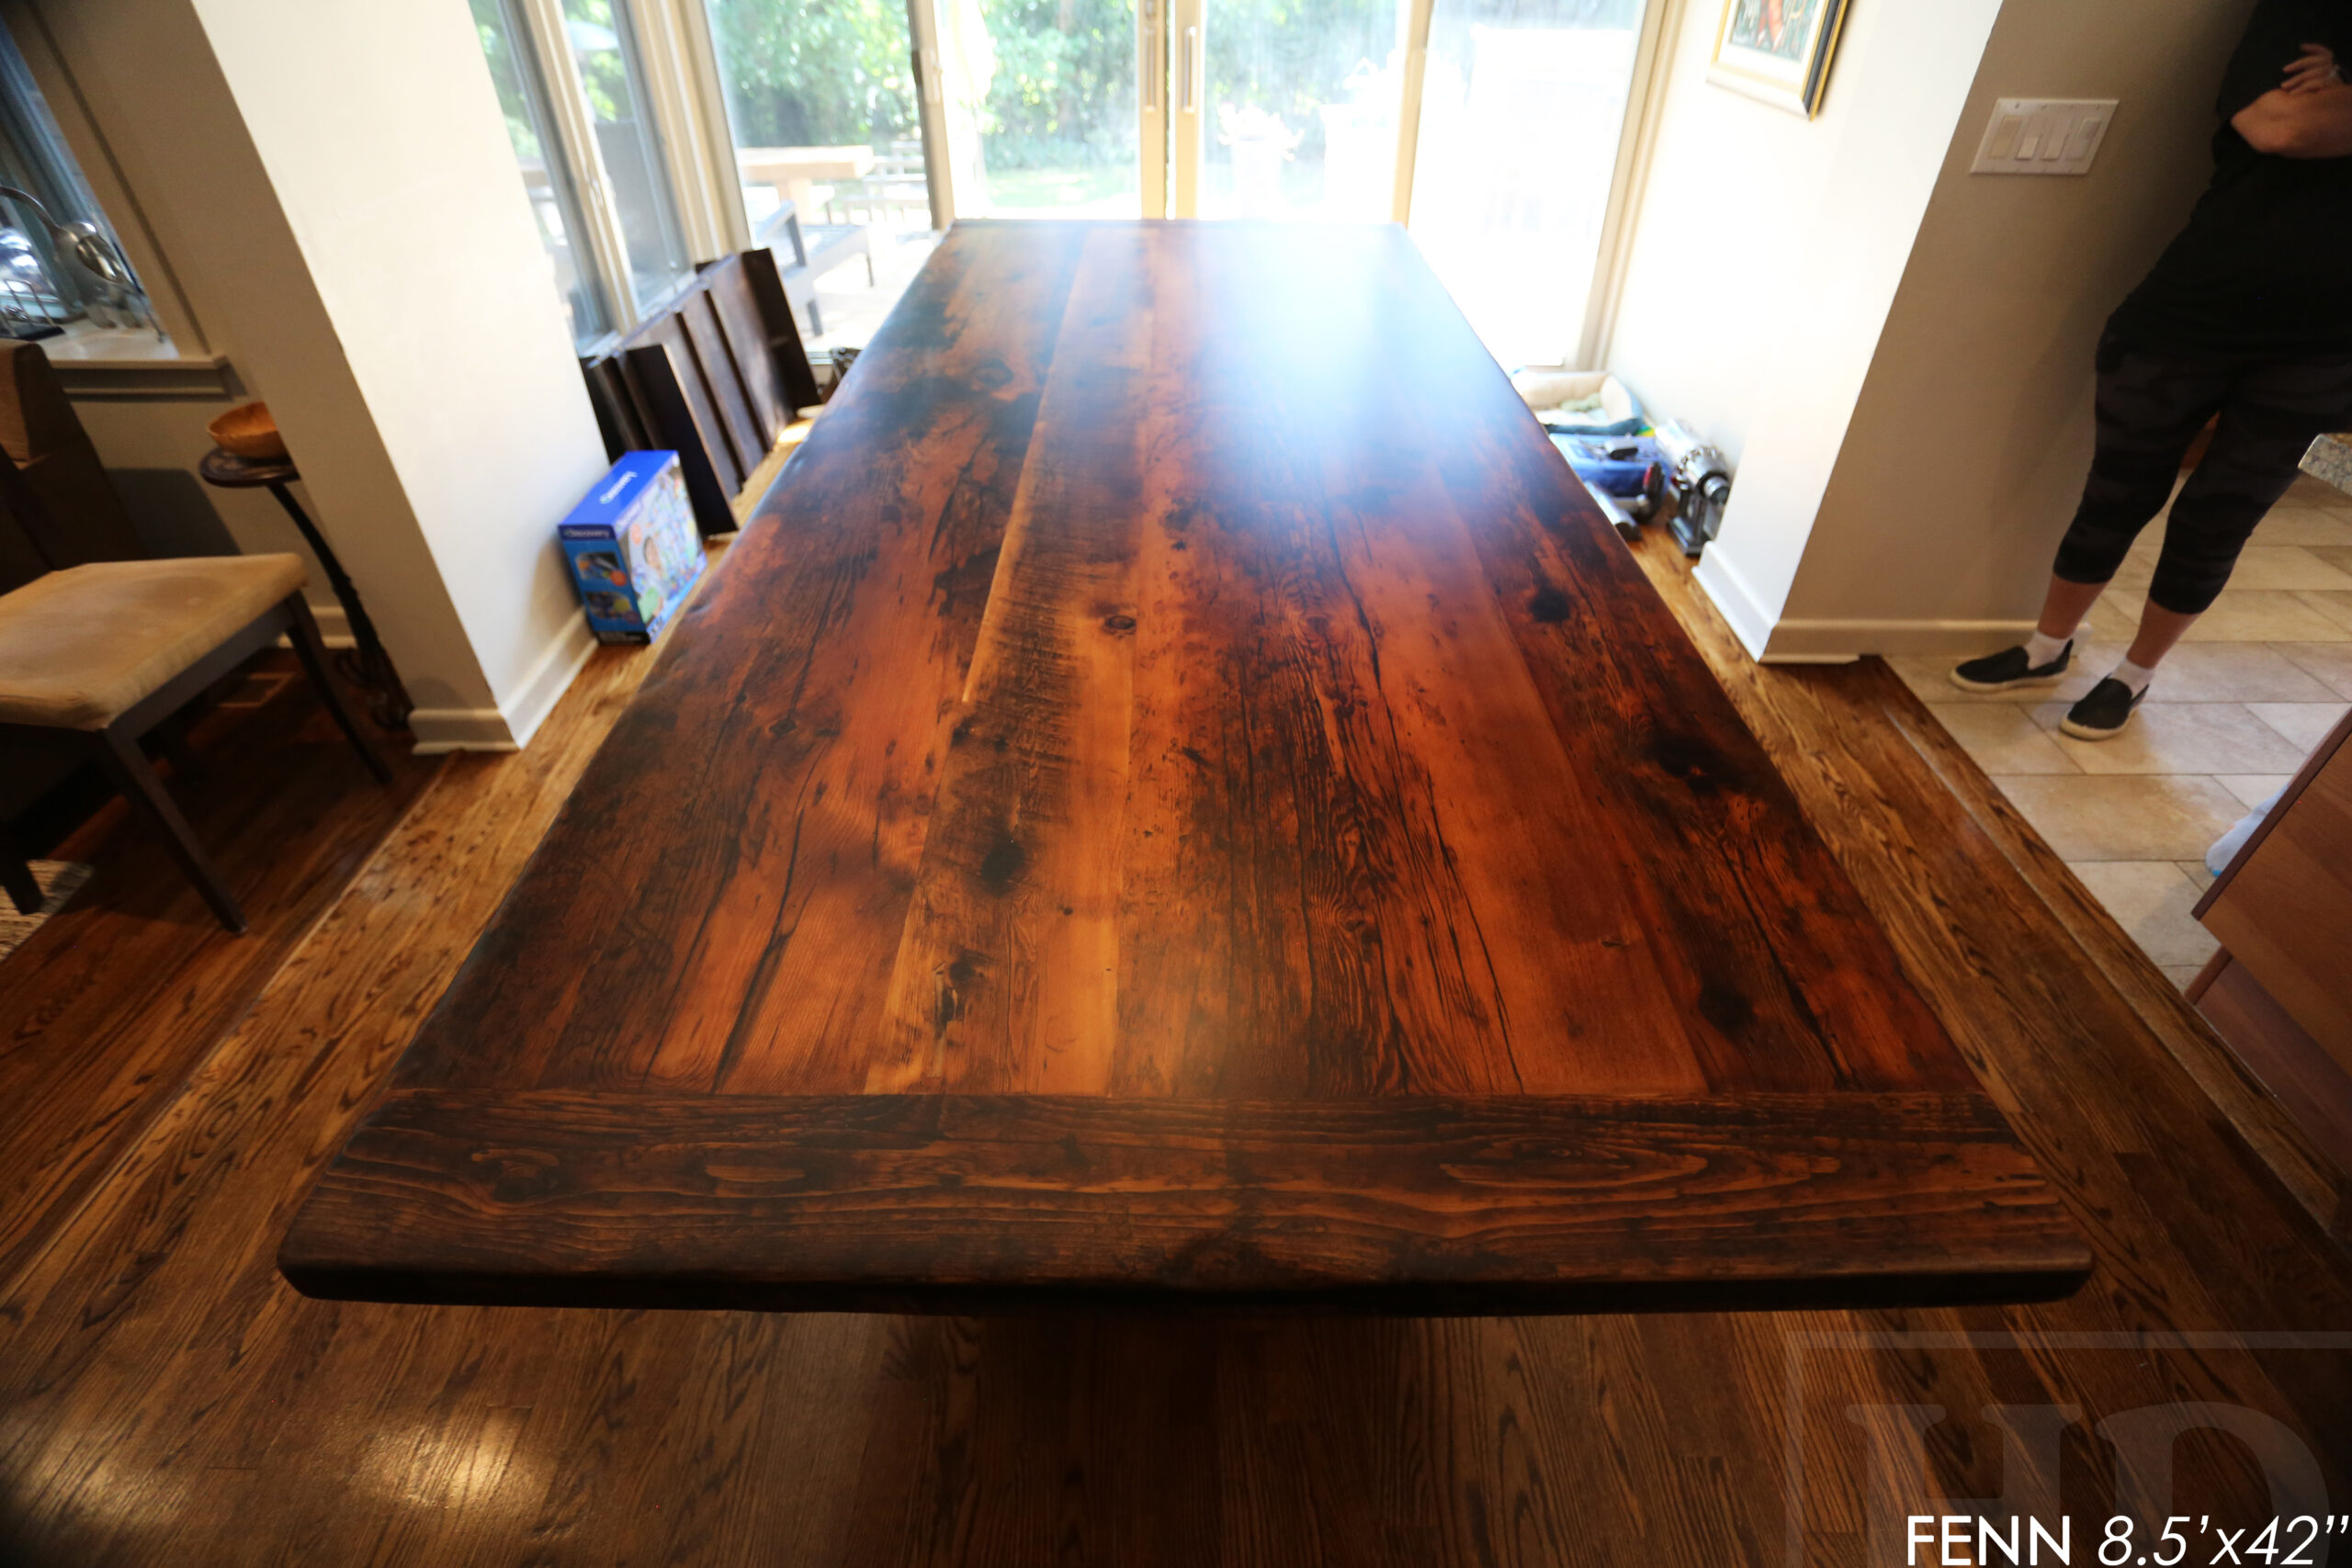 Details: 8.5' Reclaimed Wood Table we made for a Toronto home - 42" wide - Hemlock Threshing Floor Construction - Original barnwood edges & distressing maintained - Premium epoxy + matte polyurethane finish - Matte black metal base - www.table.ca